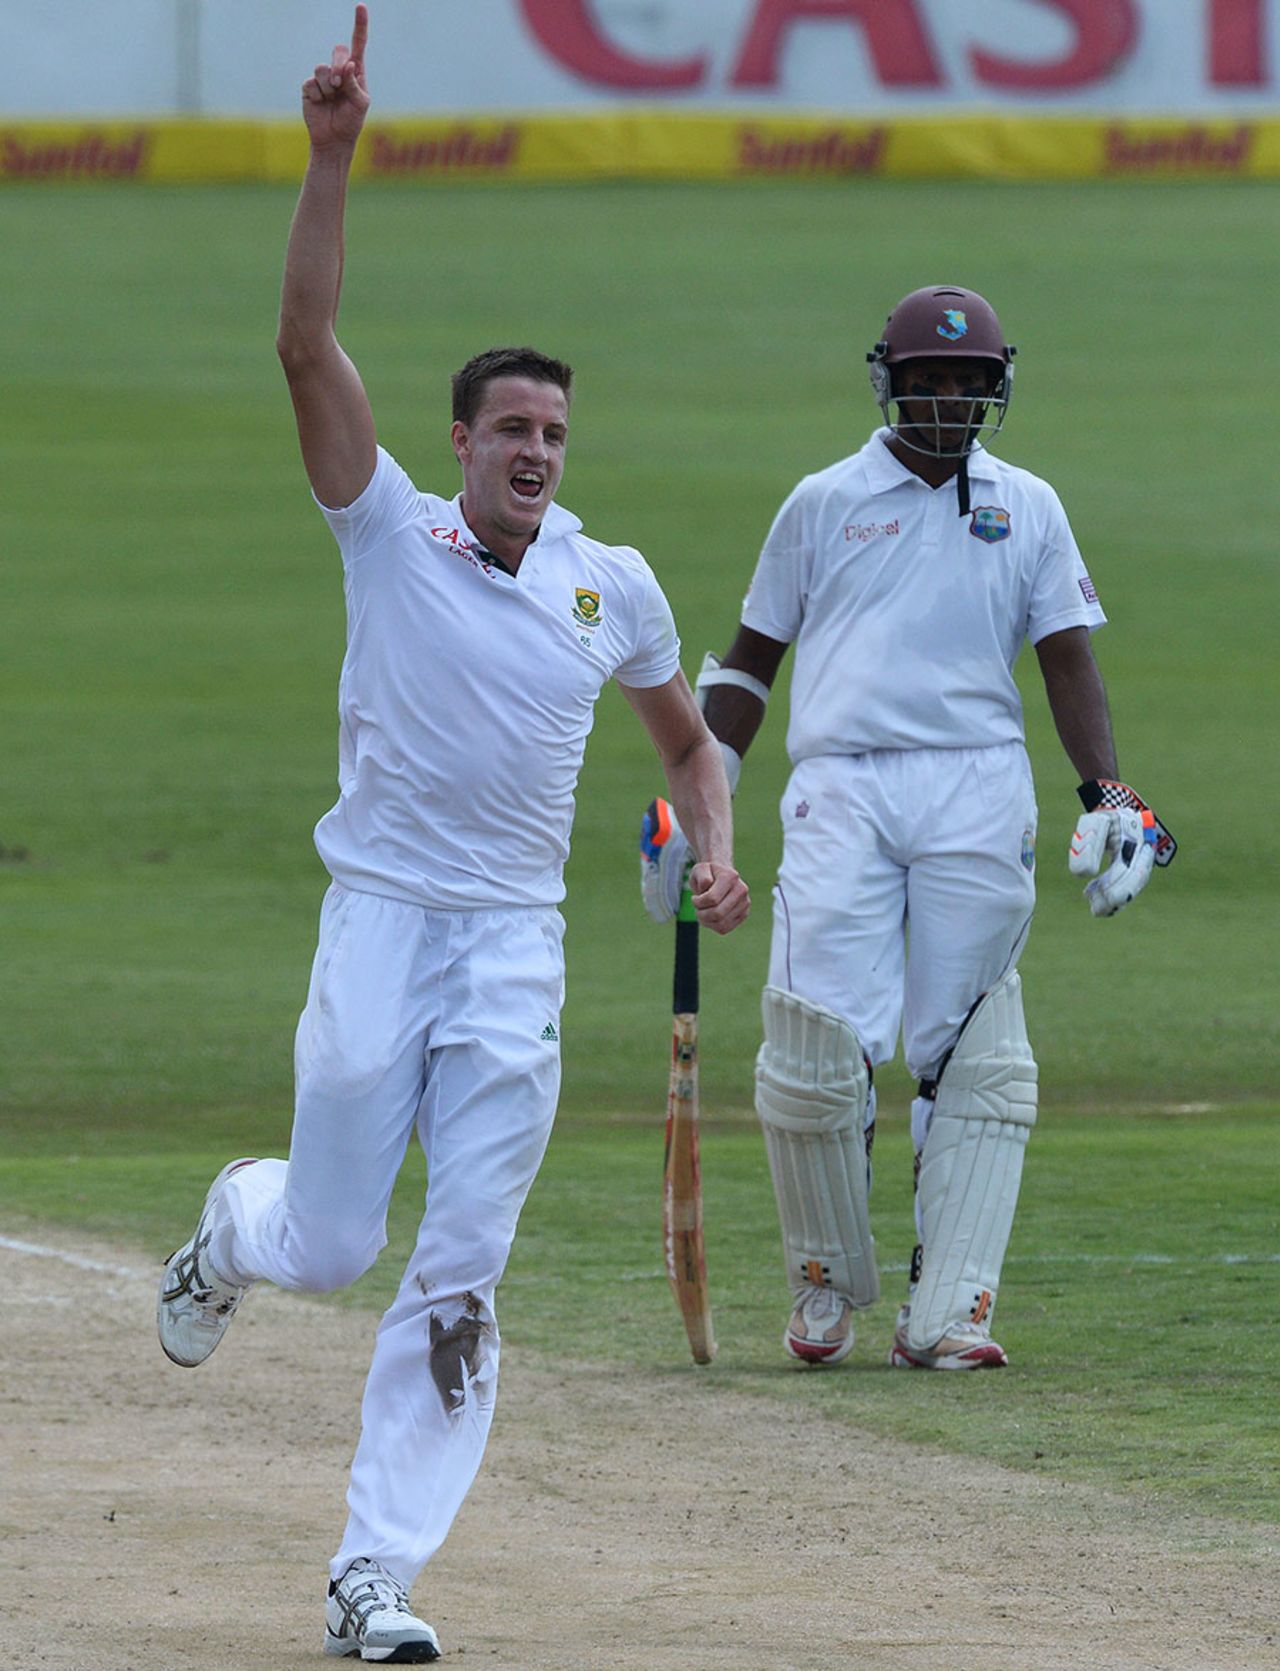 Morne Morkel finished off the innings with his third wicket, South Africa v West Indies, 1st Test, Centurion, 3rd day, December 19, 2014